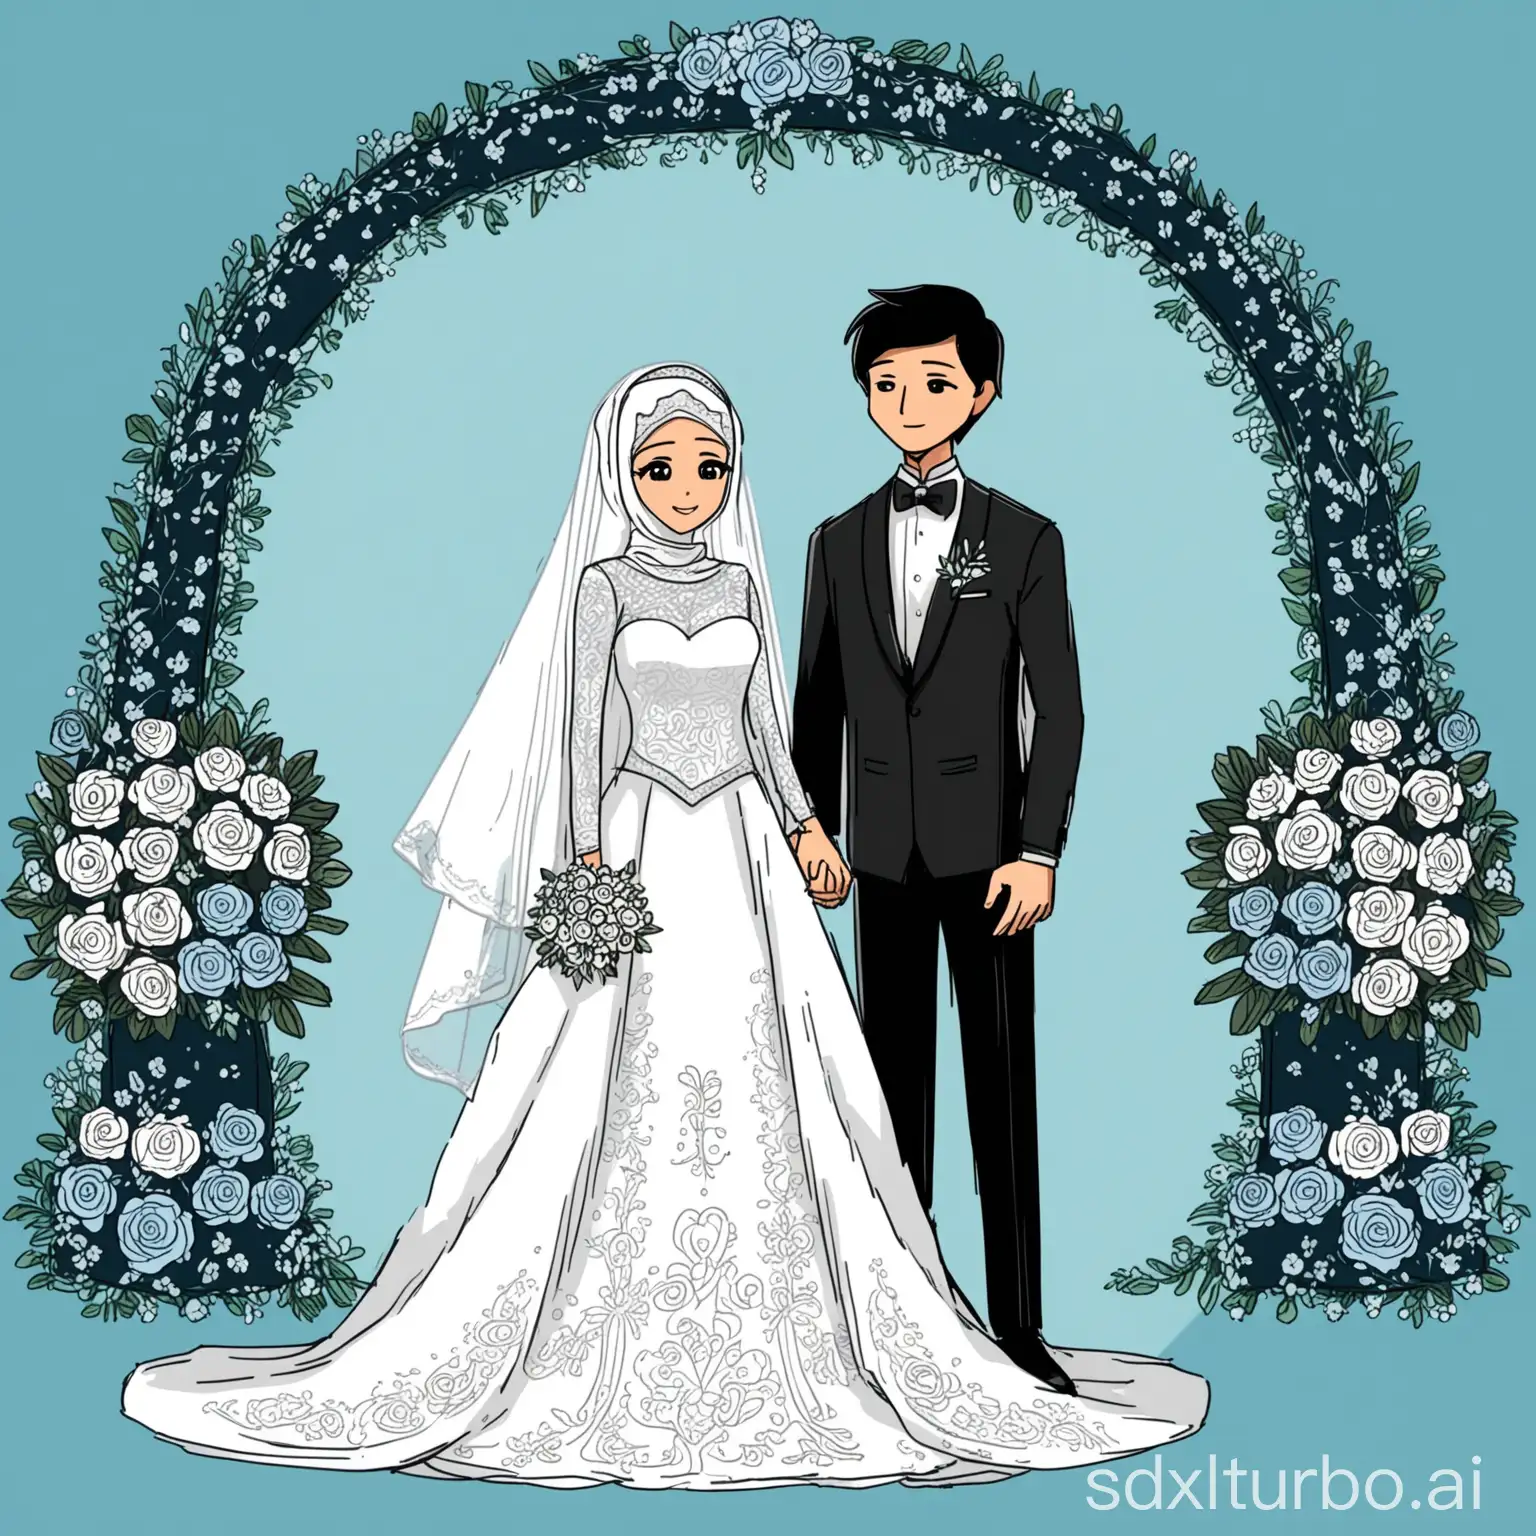 A hand-drawn animation style depiction of a wedding ceremony. The bride, with her flowing,Wearing a hijab,  dressed in a traditional white wedding gown embroidered with intricate lace details. The gown has a full skirt, a fitted bodice, and a long veil. The groom, an East Asian man, is wearing a classic black tuxedo paired with a white shirt and a black bow tie. He has short black hair, styled neatly. The background is blue wedding decir, Without anyone behind the couple. Creat full body images